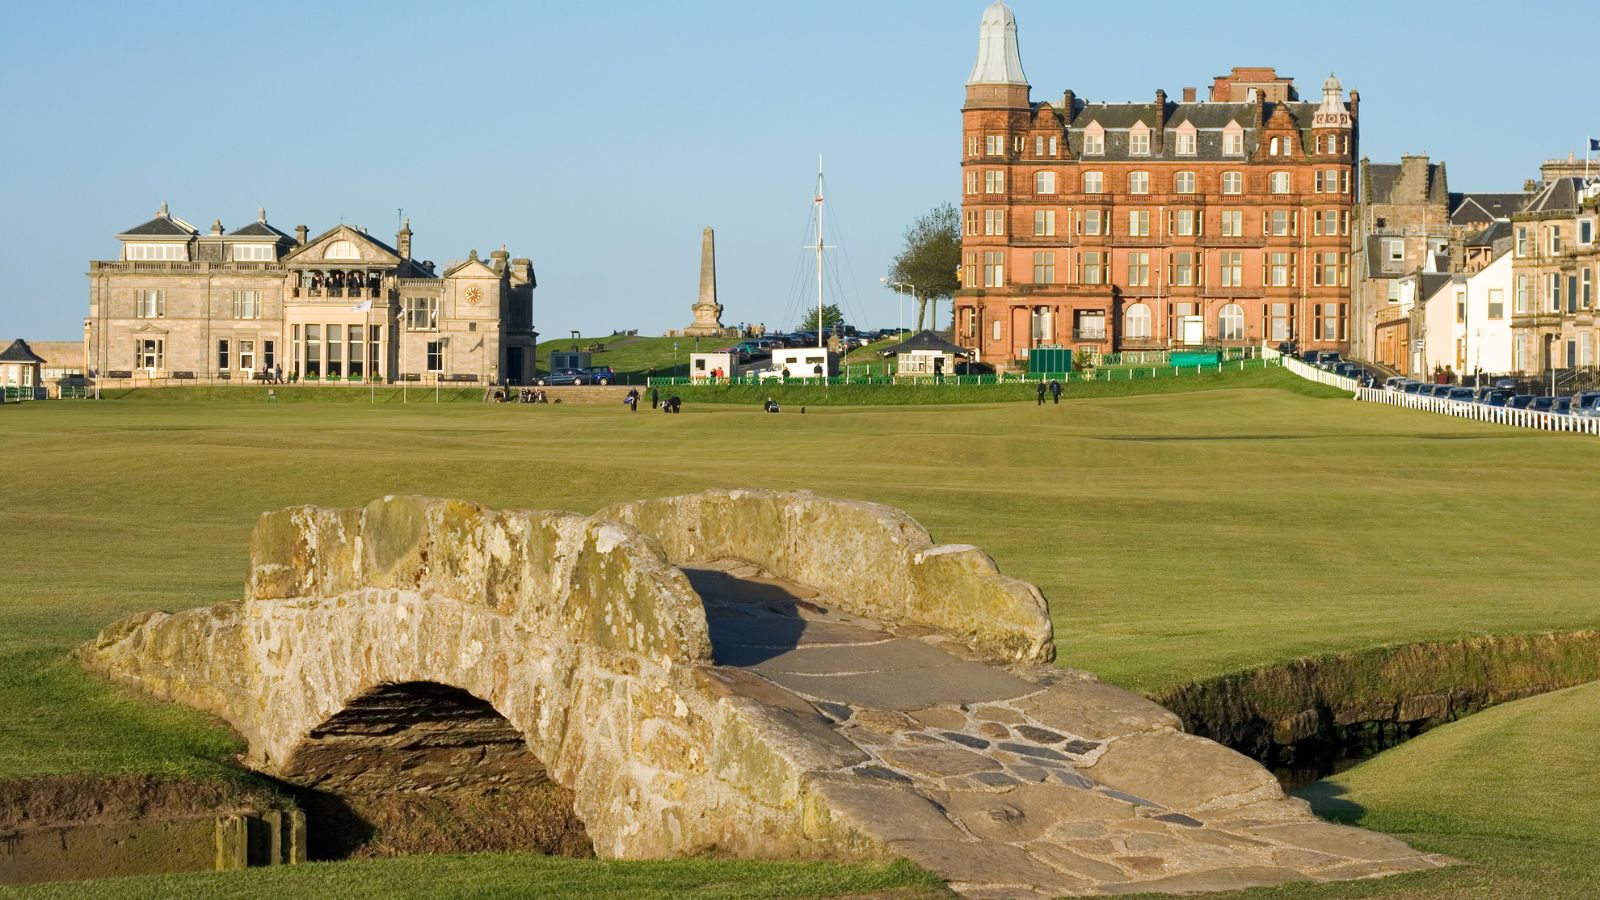 <p>I’m not a golfer. But if I were, I’d be up to Scotland in a heartbeat. The eastern coast is literally <a href="https://www.historic-uk.com/HistoryUK/HistoryofScotland/The-History-of-Golf/" rel="noreferrer noopener">where the game started</a>. Back then, you’d have been using a bent stick to hit pebbles over sand dunes (literally). Nowadays, you can play on some of the oldest golf courses on the planet, often surrounded by gorgeous coastal views.</p><p>A few of the most famous fairways to check out include:</p><ul> <li>Old Course in St. Andrews</li> <li>North Berwick</li> <li>Royal Dornoch</li> <li>Cruden Bay</li> <li>Castle Stuart</li> </ul>